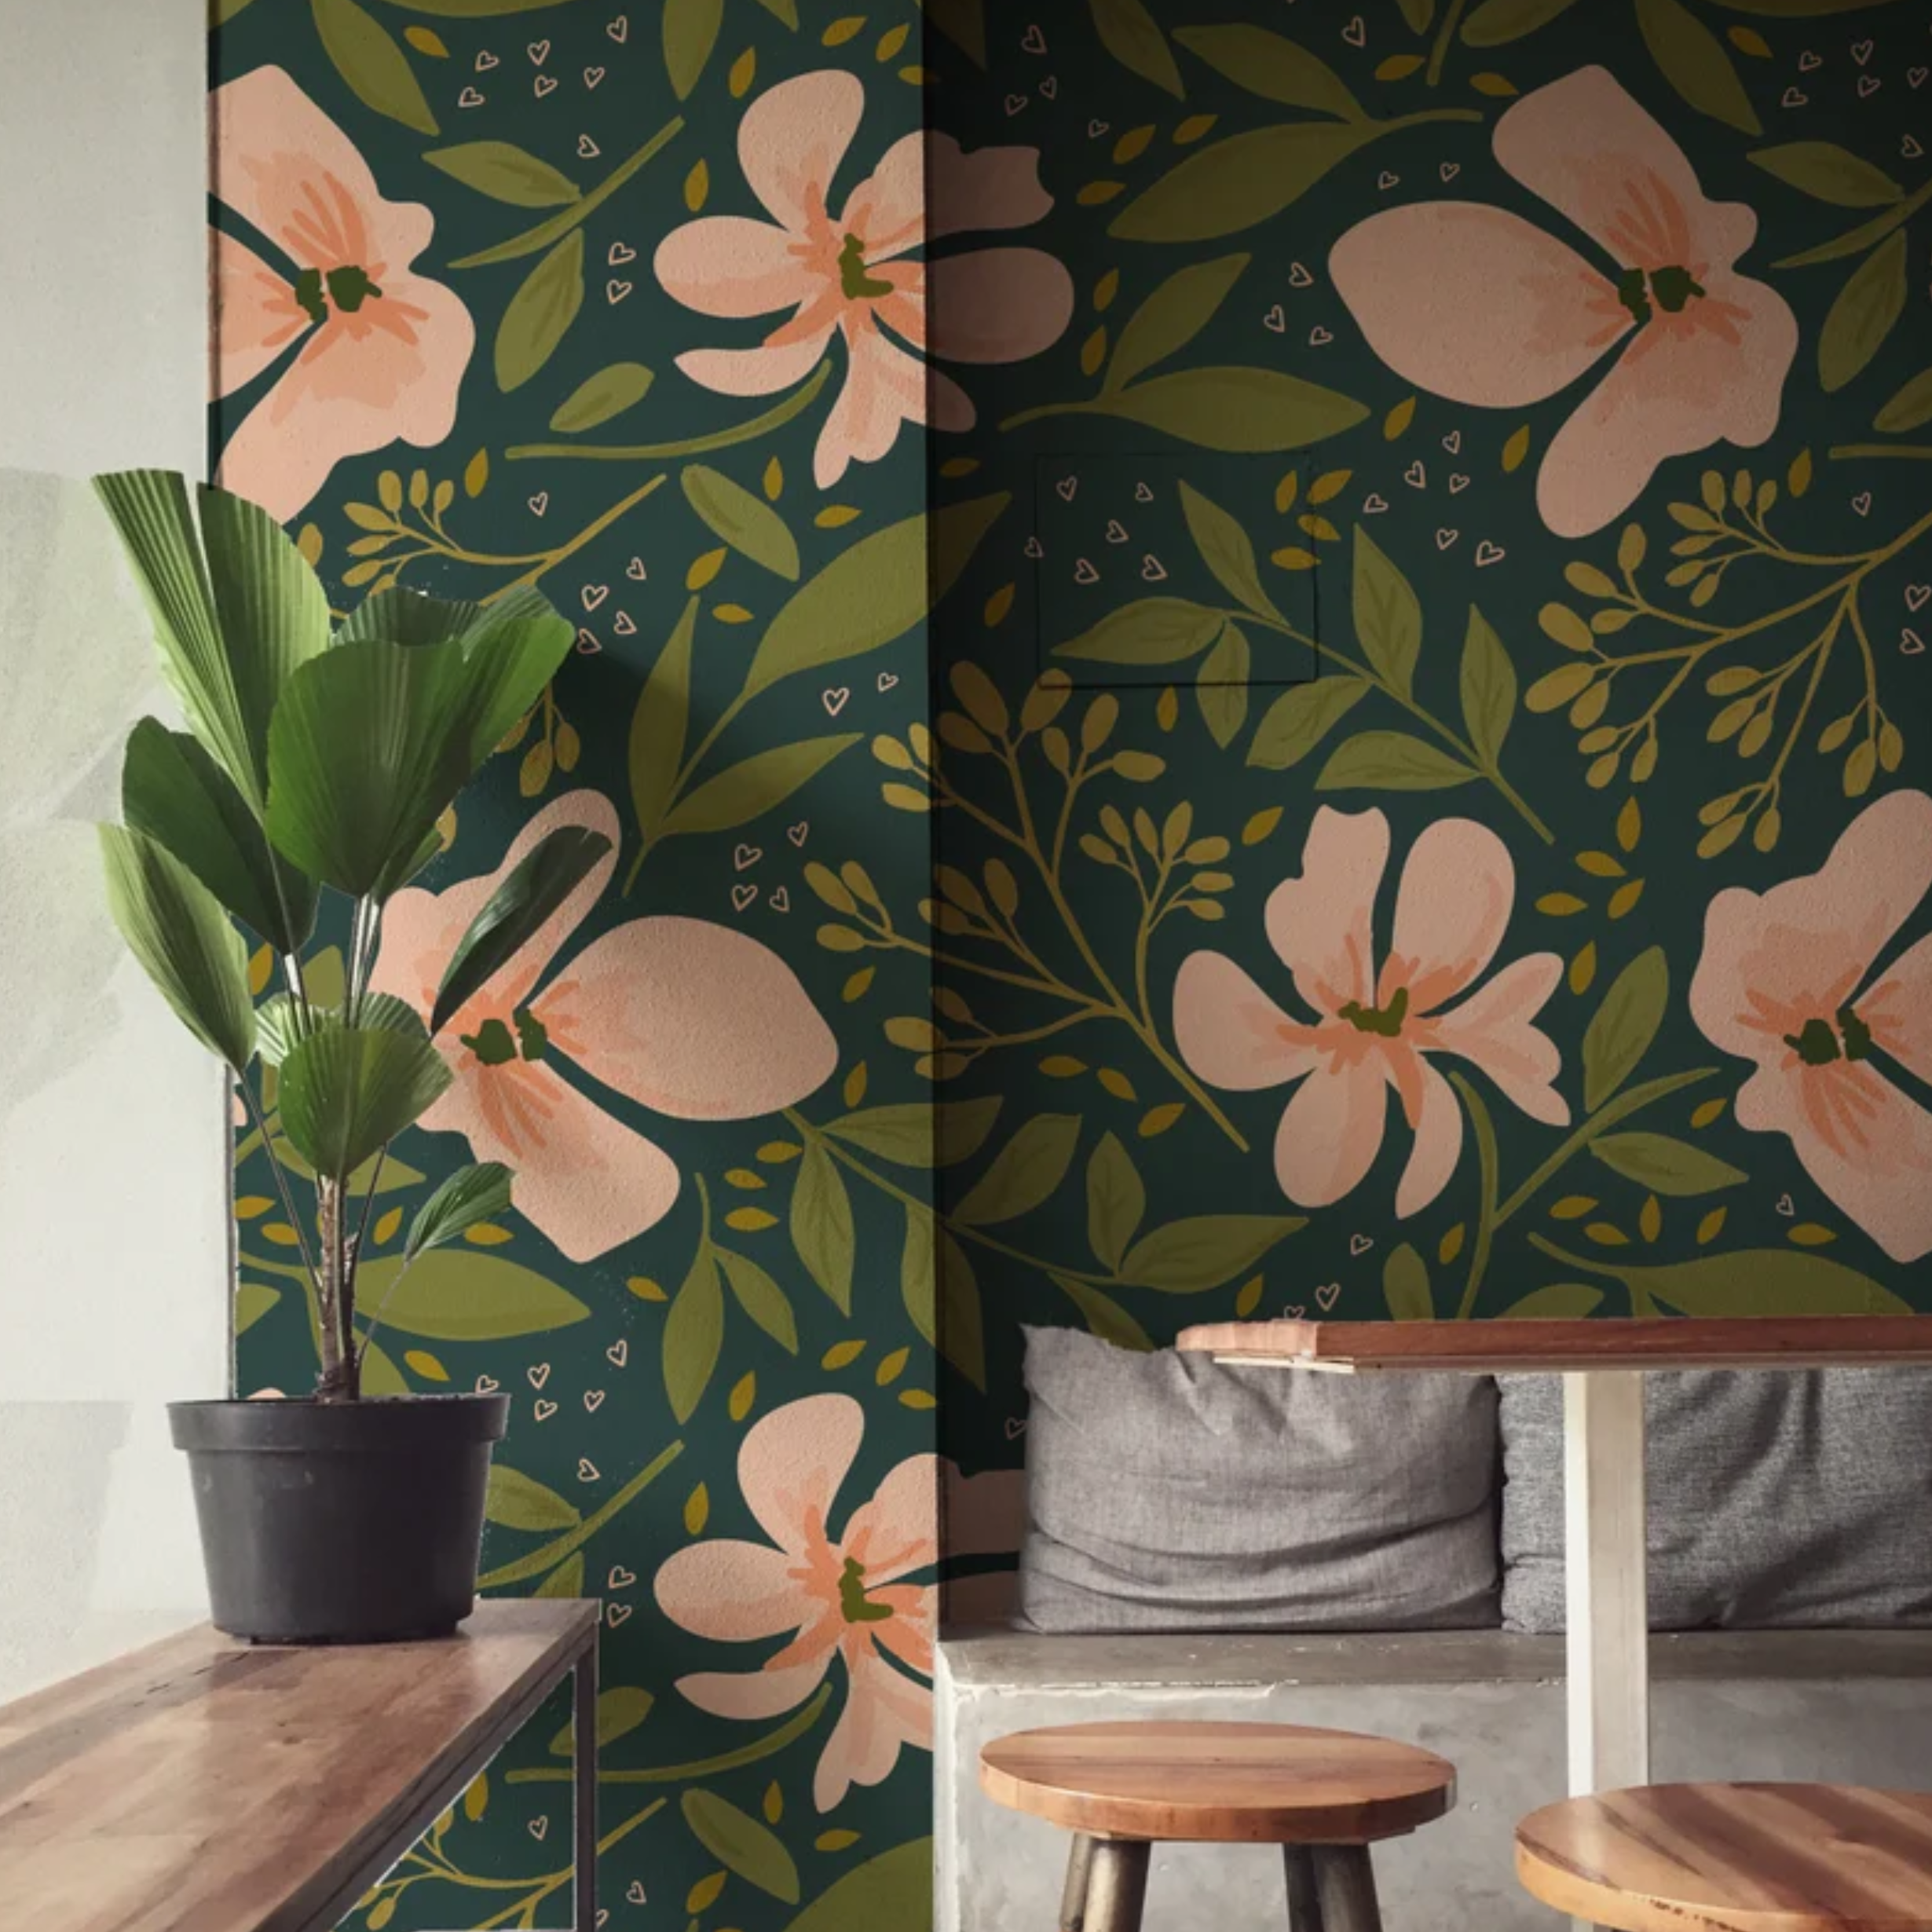 A chic dining area with 'Floral Love Watercolour Wallpaper' providing a captivating dark backdrop adorned with large watercolor pink blossoms and leaves, complemented by natural wood furniture and lush green plants